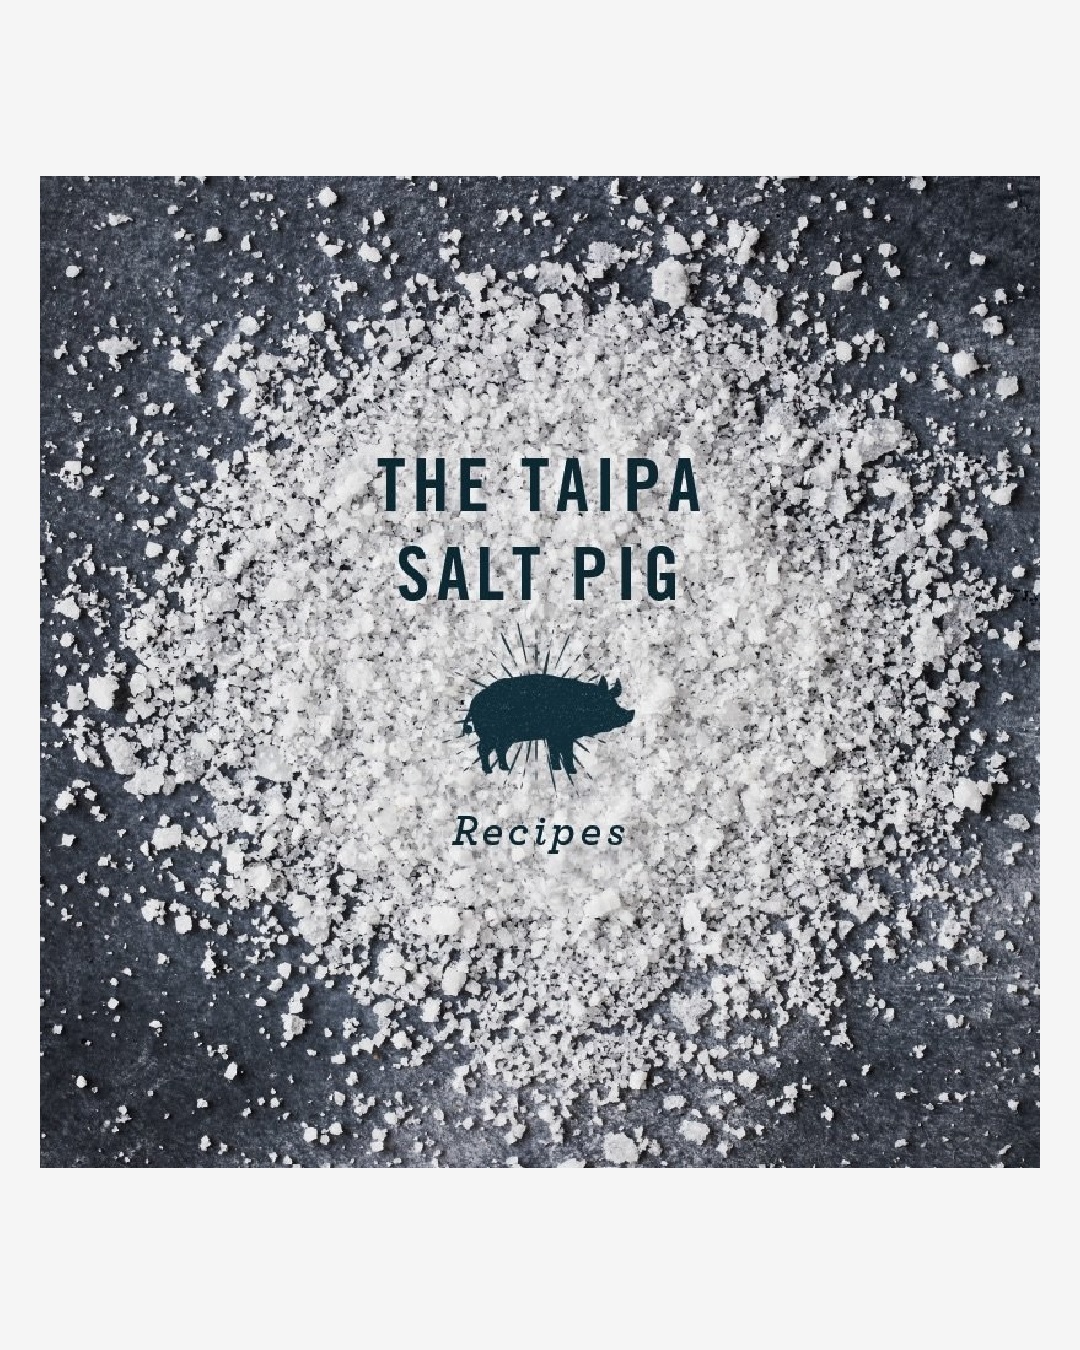 The Taipa salt recipe book with pig on cover